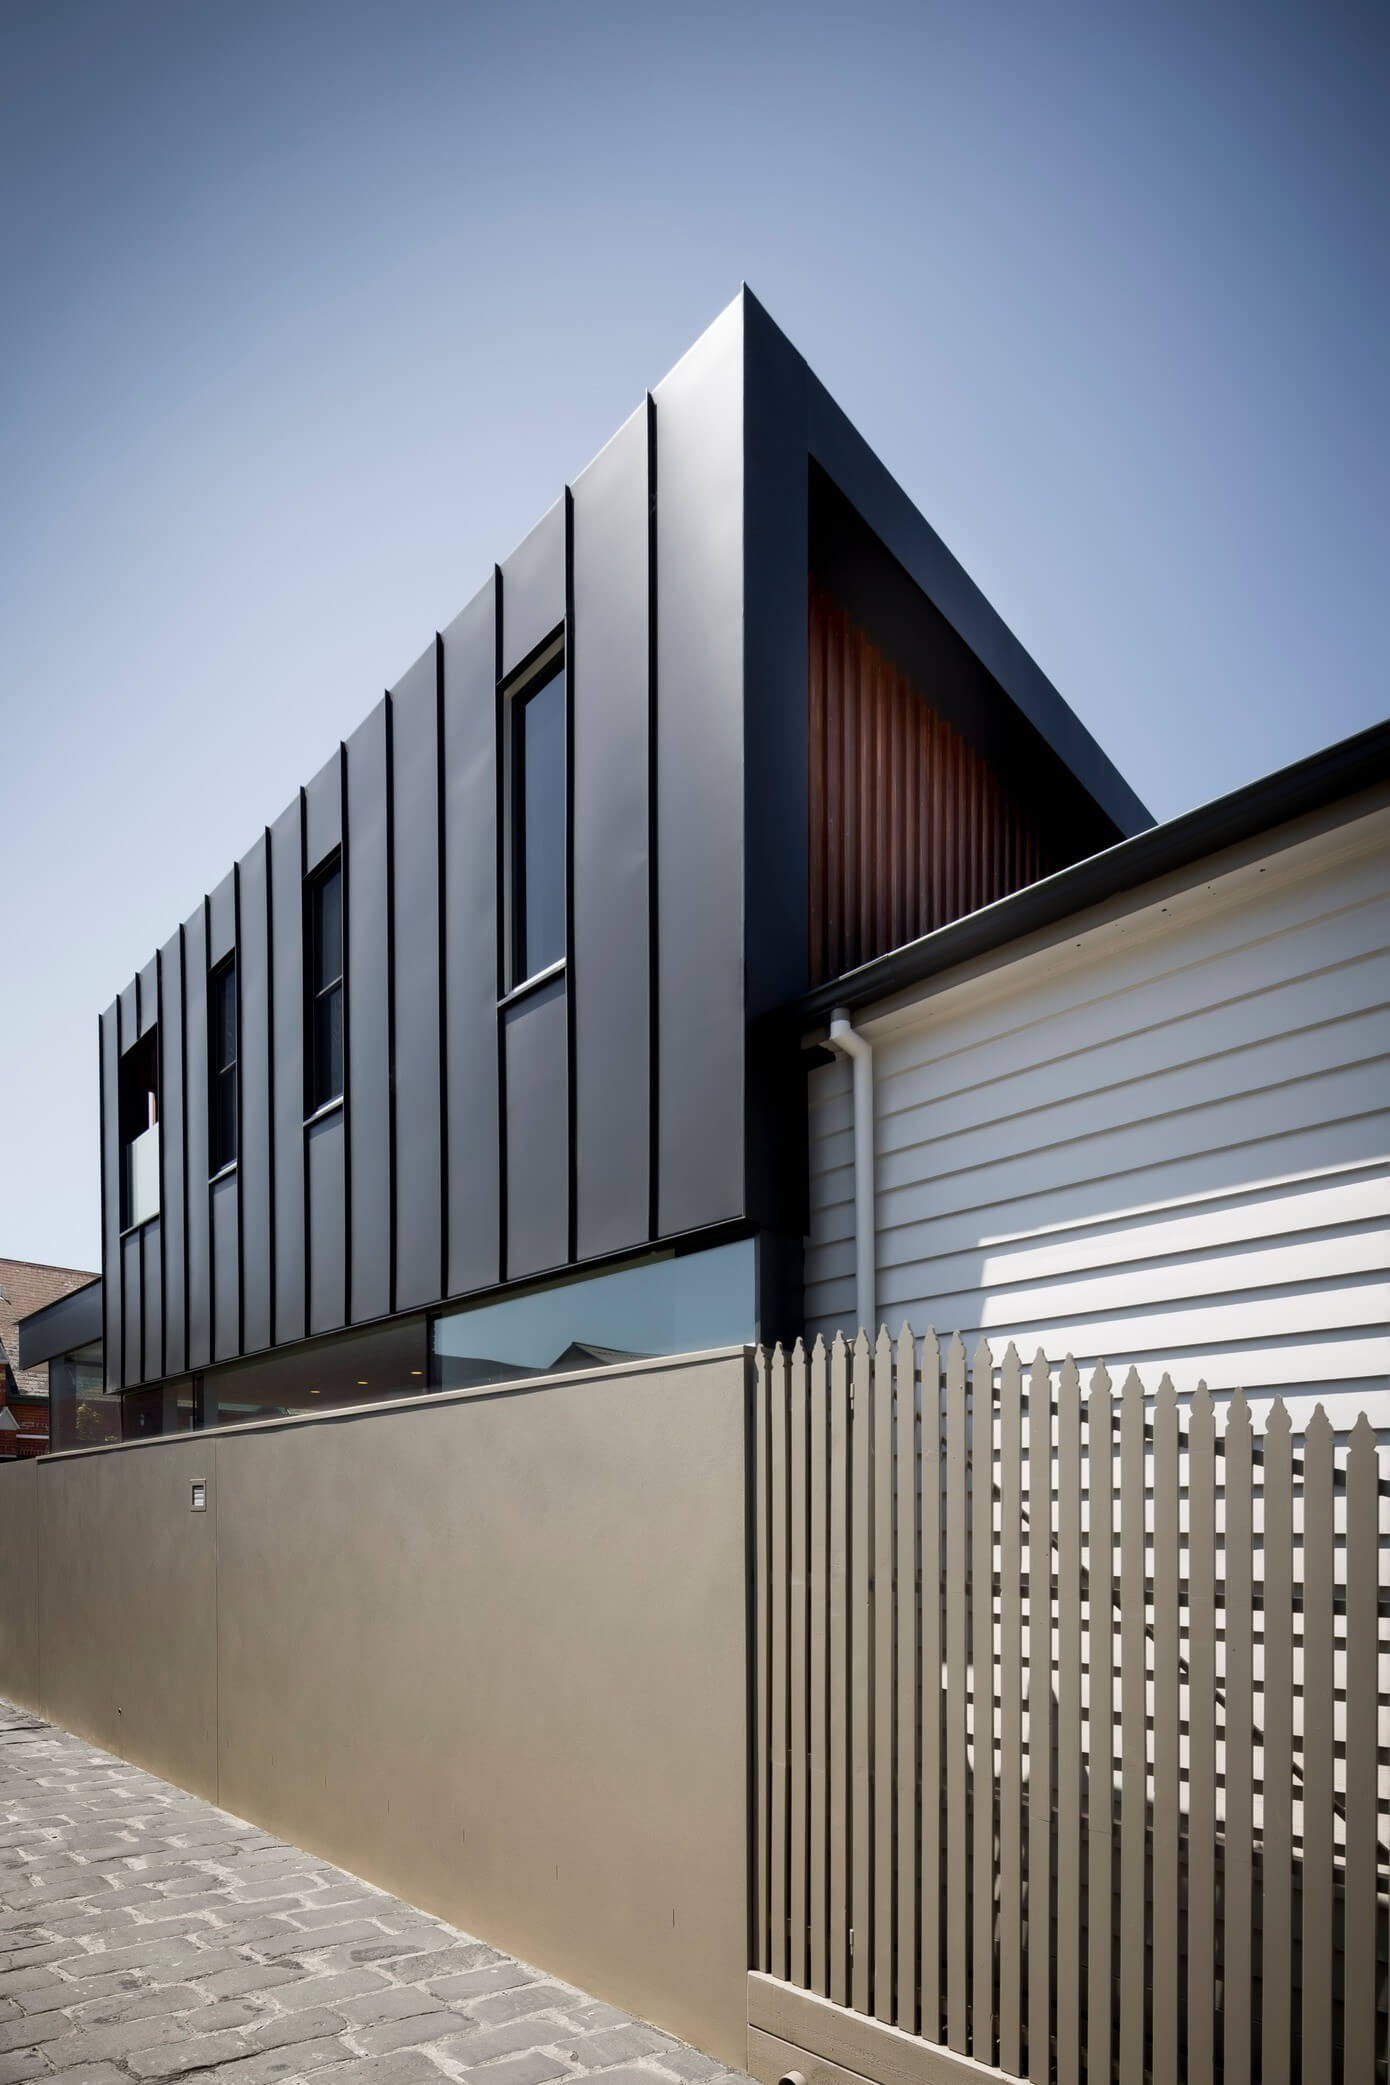 Armadale House by Mitsuori Architects